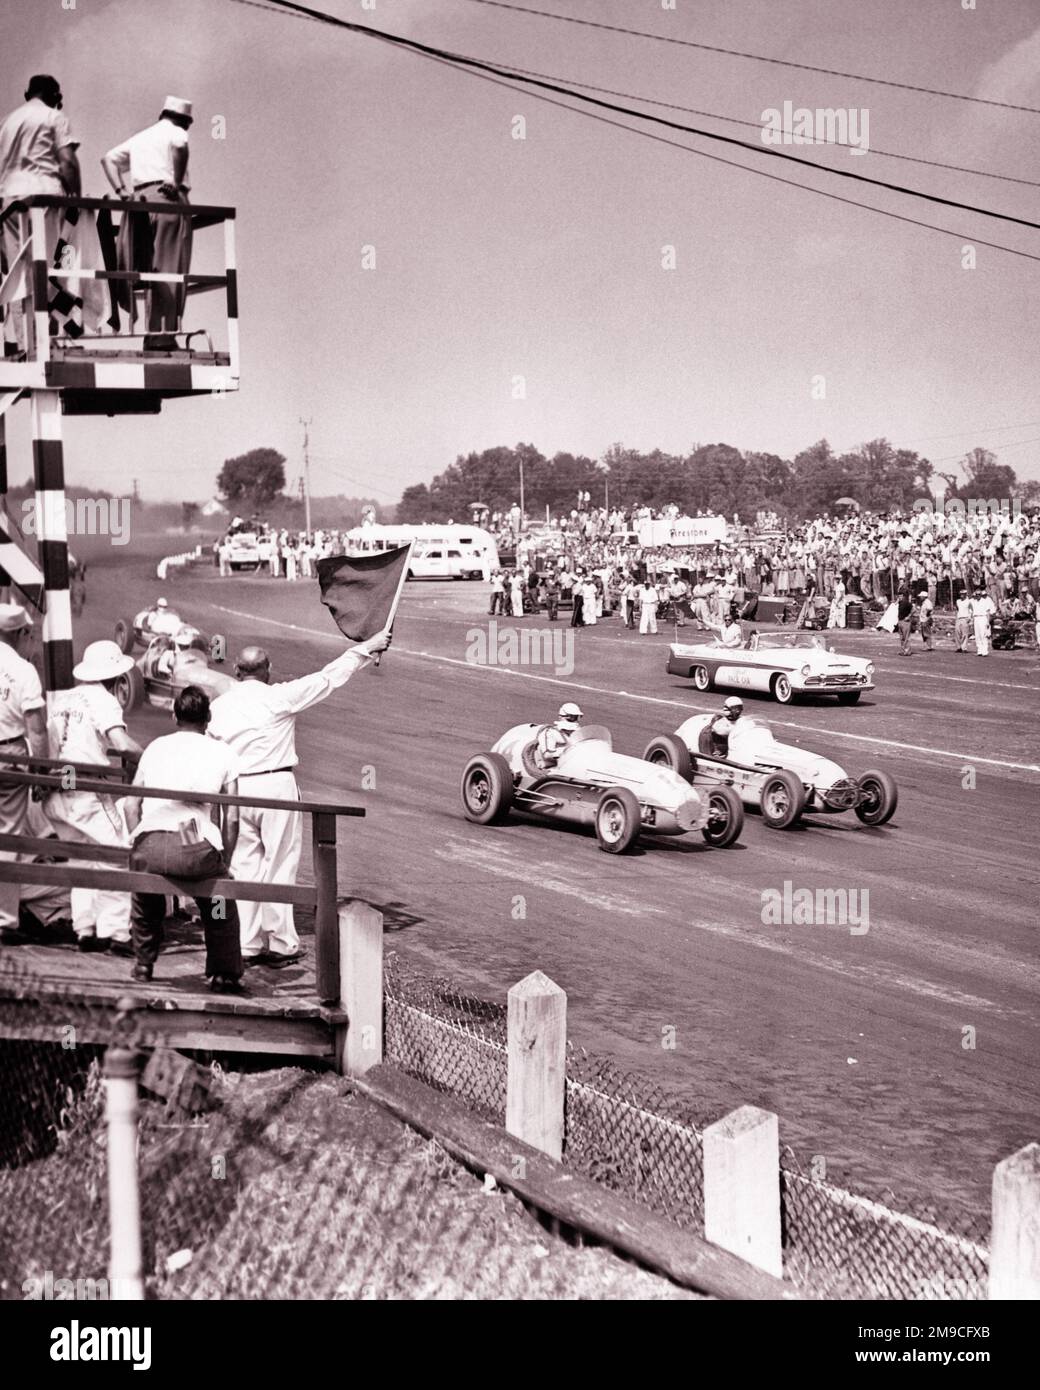 1950s 100 MILE SPORTS CAR RACE AT THE LANGHORNE SPEEDWAY LANGHORNE PA USA FLAGMAN WAVING A FLAG OF WARNING - m676 HAR001 HARS STRATEGY AUTOS EXCITEMENT PA WARNING RISKY HAZARDOUS OCCUPATIONS PERIL PROFESSIONAL SPORTS UNSAFE AUTOMOBILES VEHICLES MILE JEOPARDY OFFICIALS RACEWAY COOPERATION LANGHORNE THRONG ATTENDANCE BLACK AND WHITE HAR001 OLD FASHIONED Stock Photo